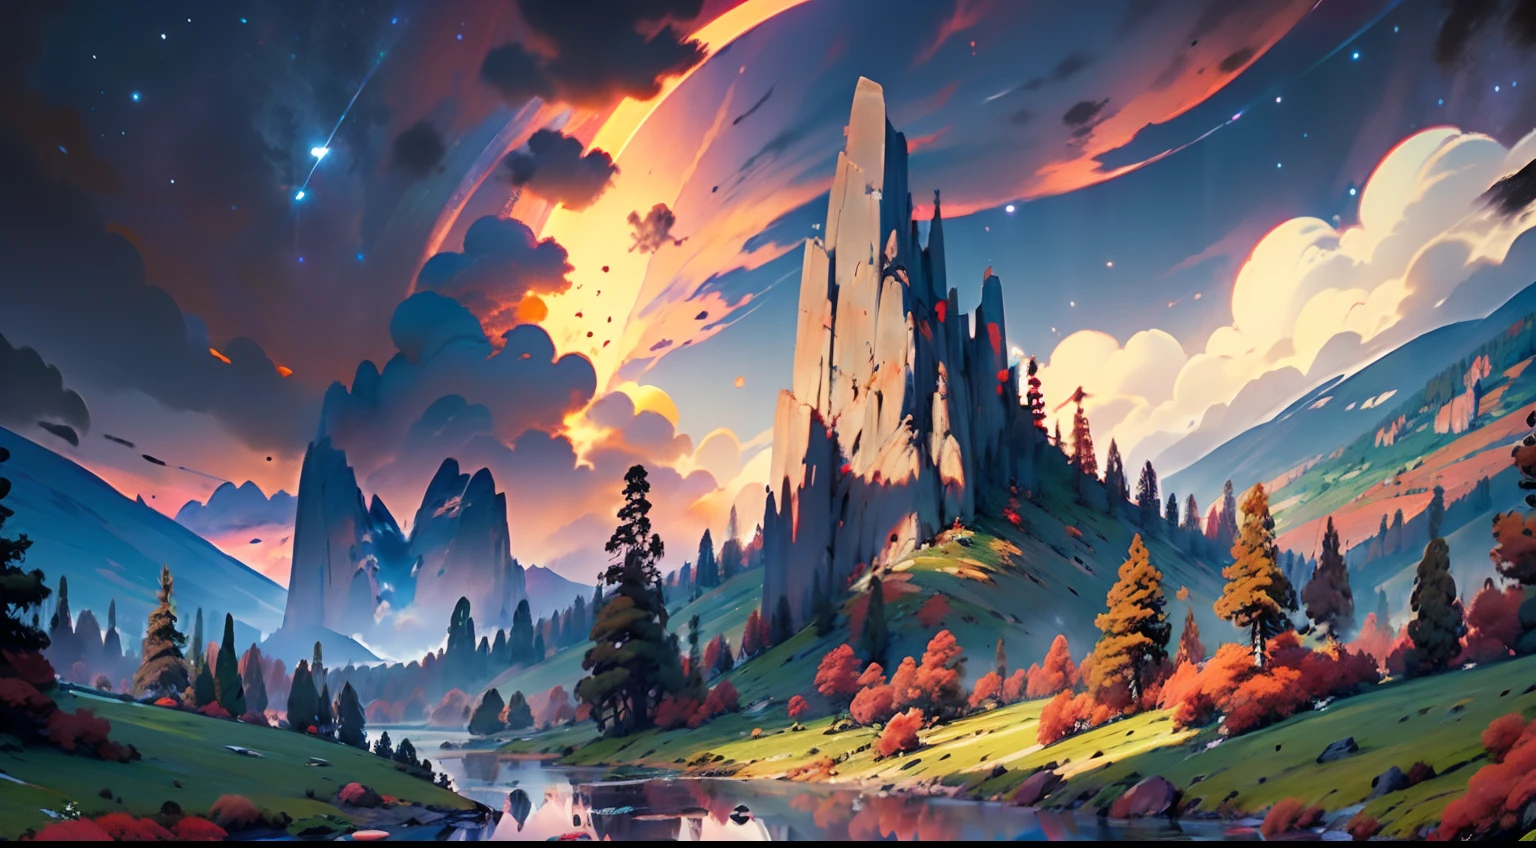 ((Perfect Quality)), (A giant mountain with a round hole in the center), Sunset in the background, Red clouds, Small lake in the foreground, ((Stone dust in the air)),